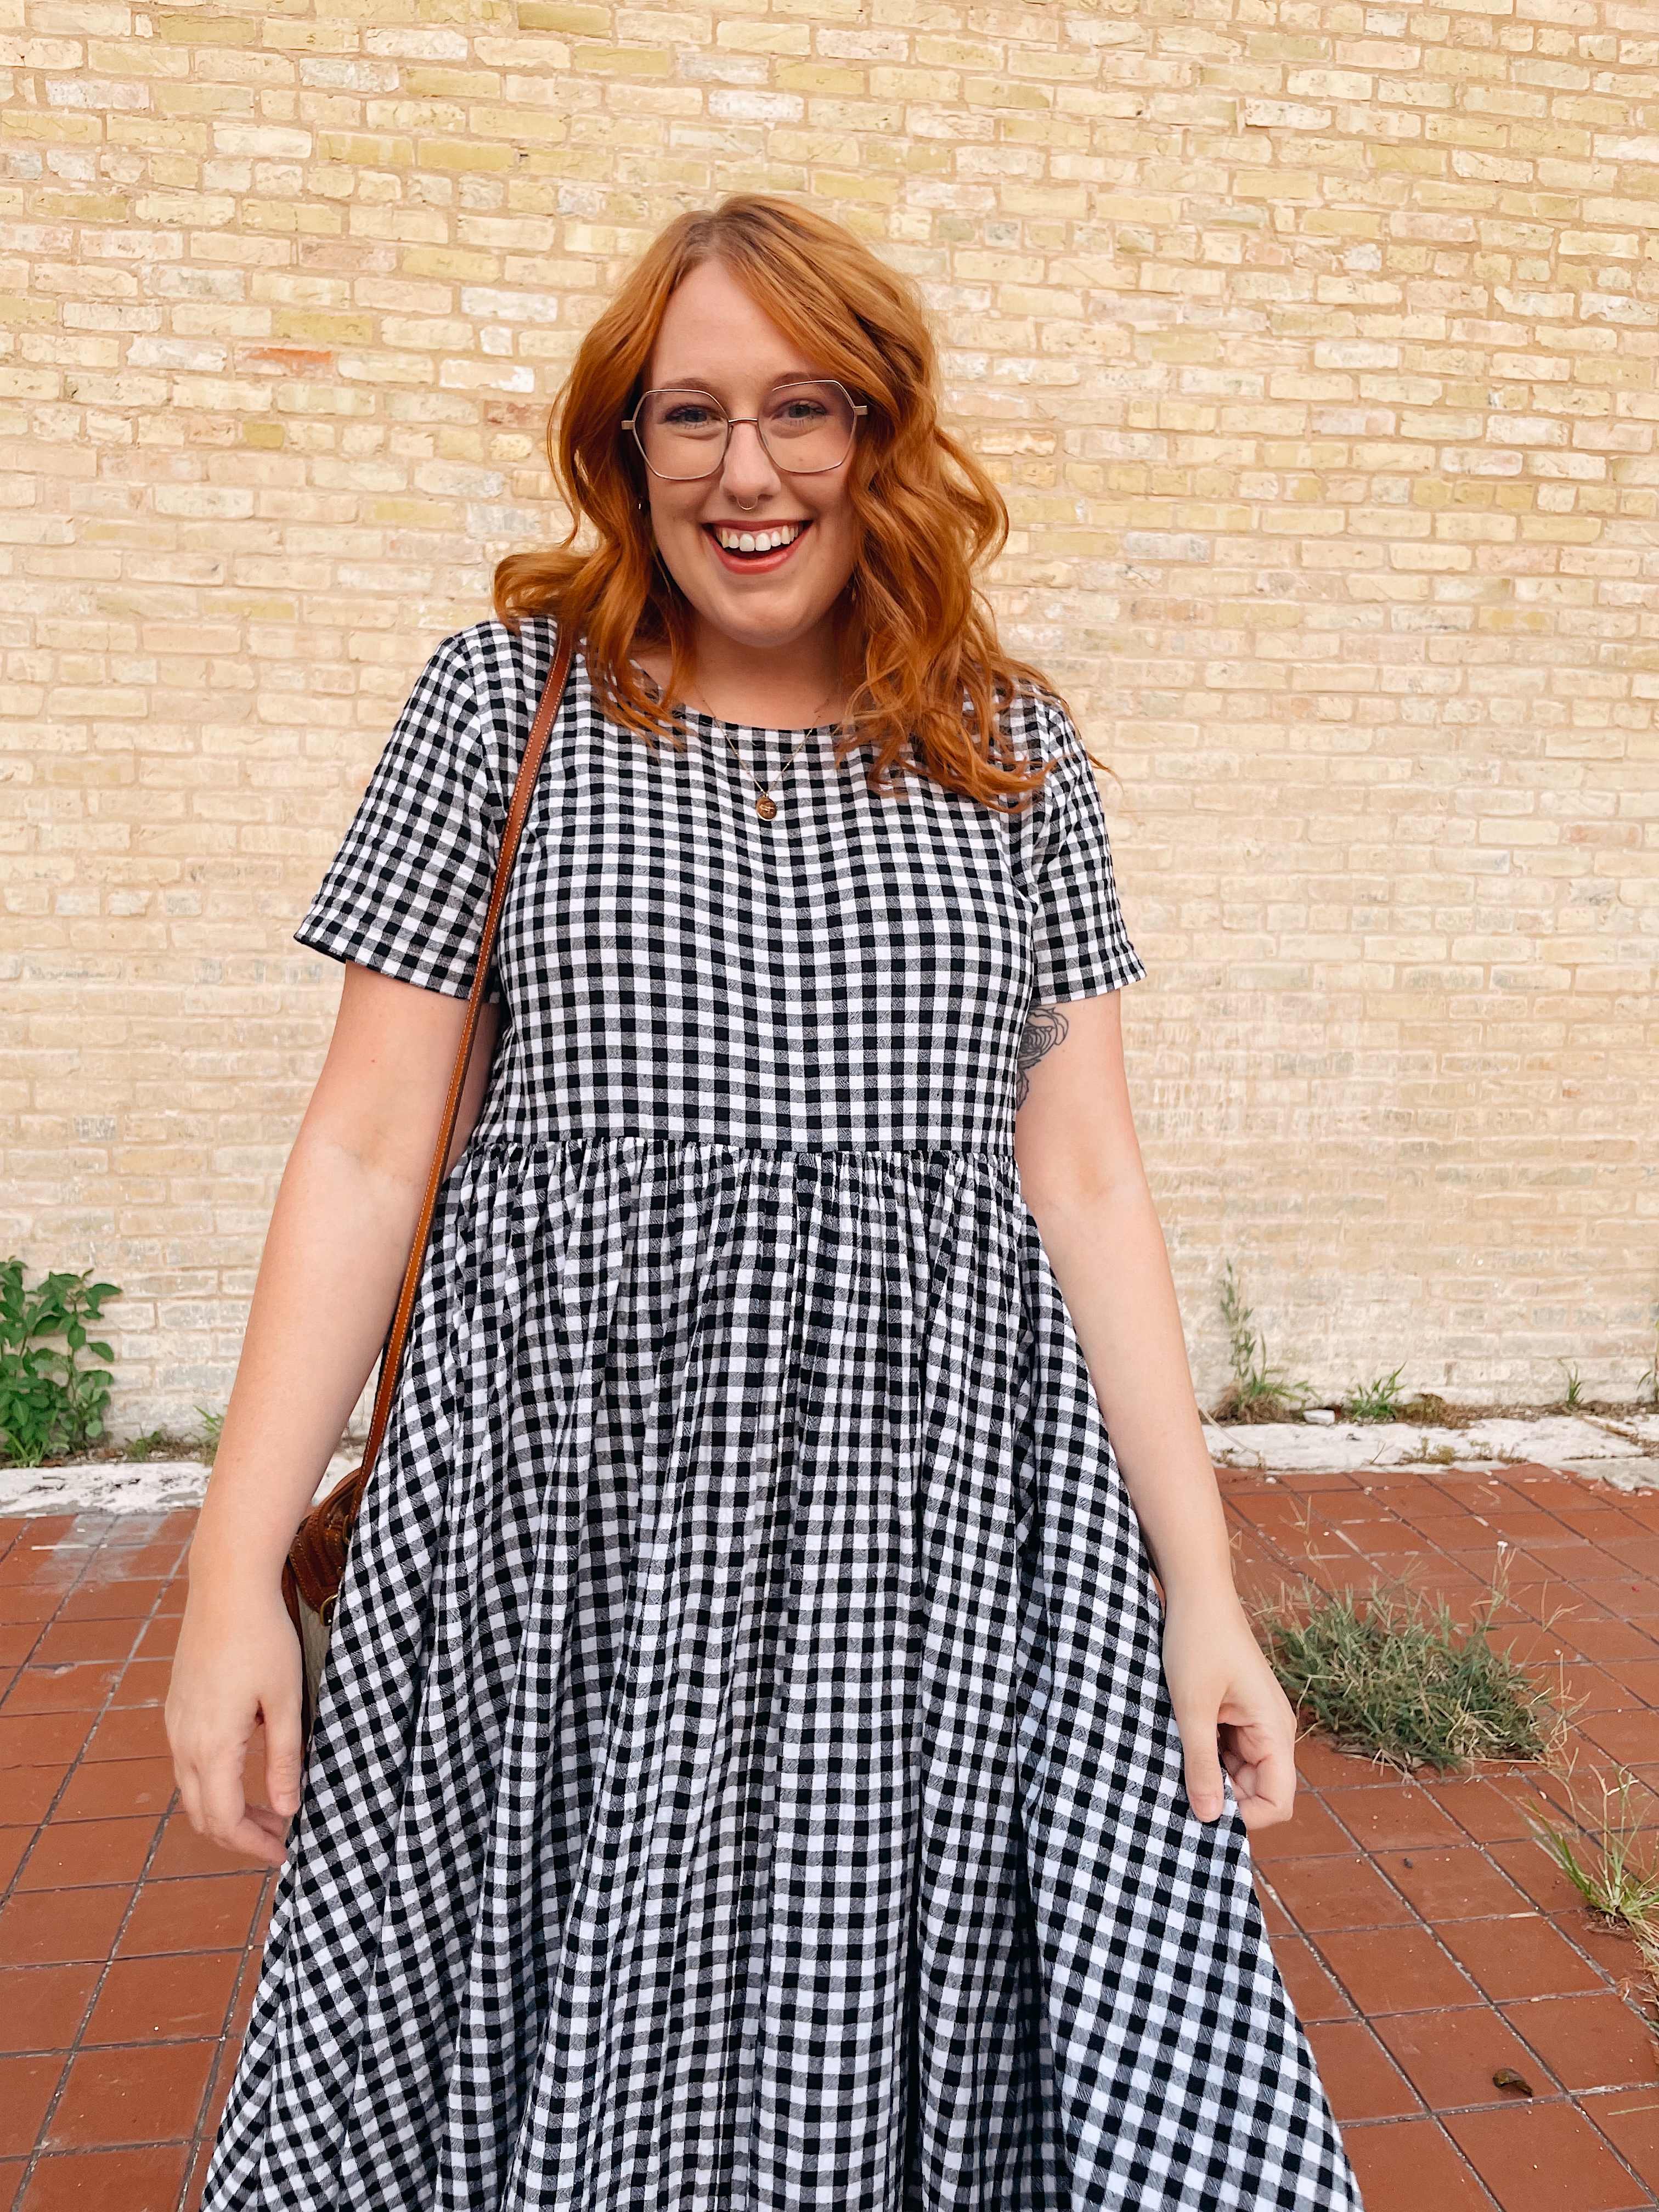 Nic standing in front of a brick wall with curled ginger hair and a gingham dress